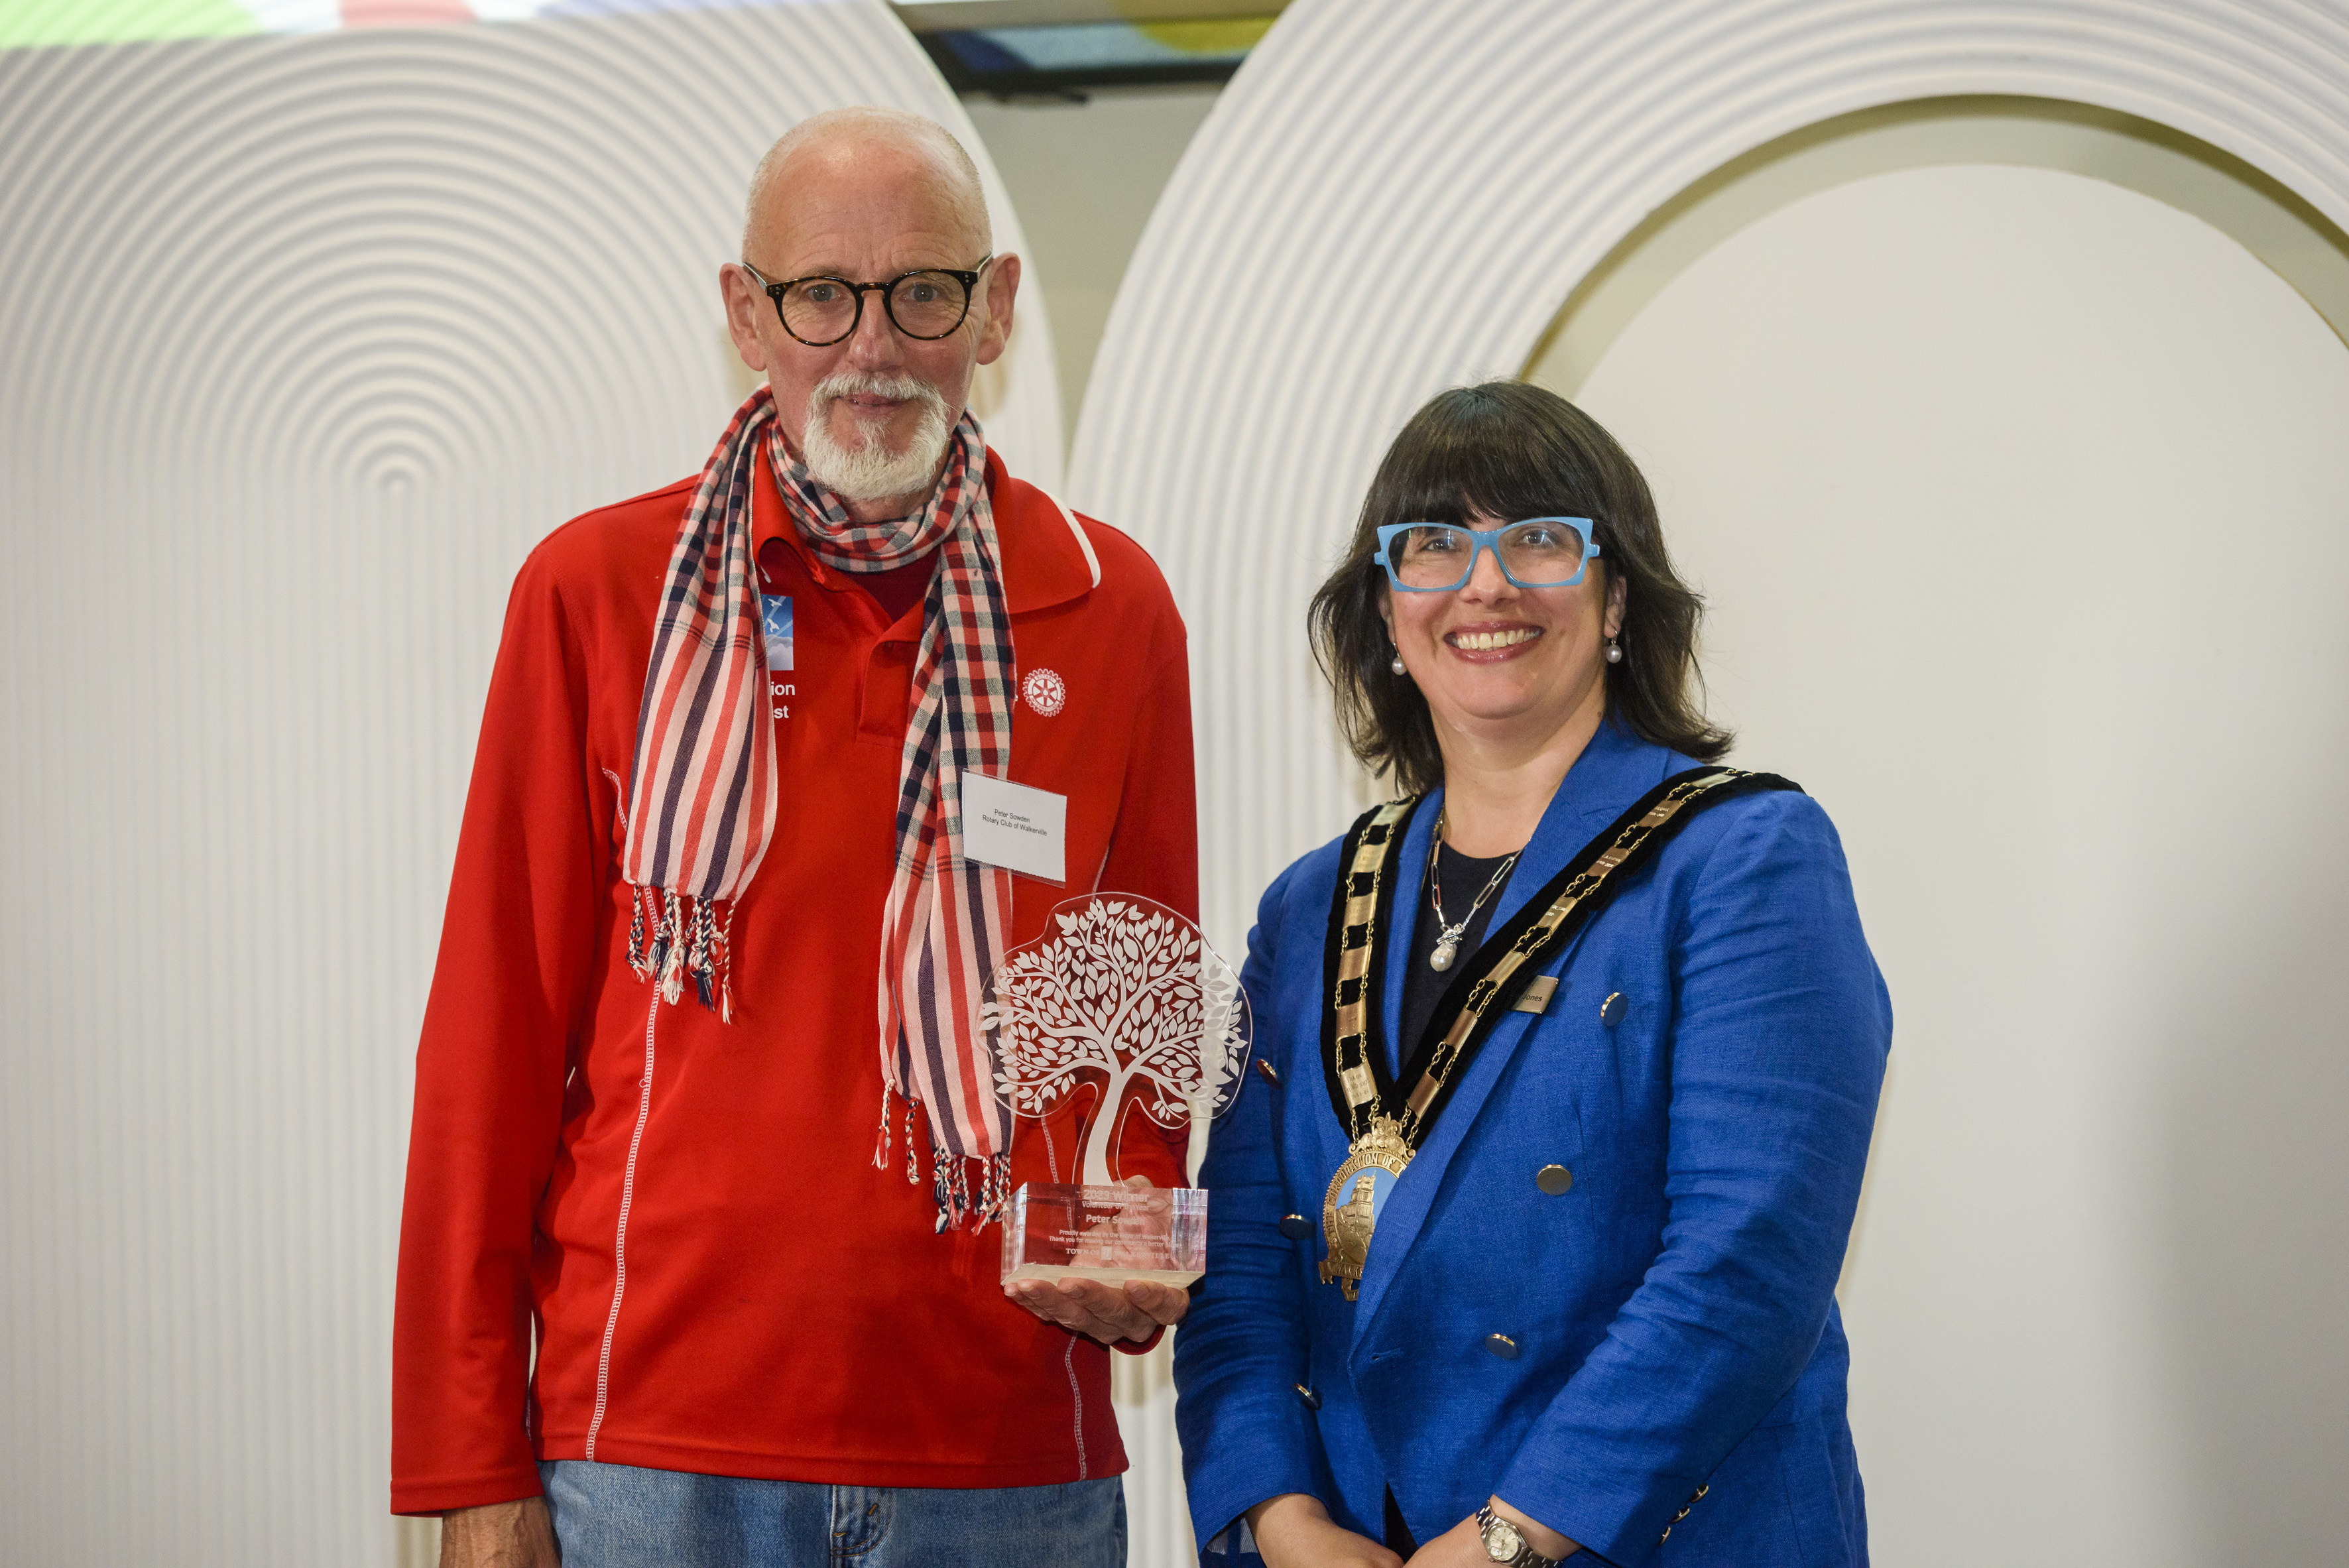 Winner of the Volunteer of the Year Award, Peter Sowden from the Rotary Club of Walkerville, with Mayor of Walkerville, Melissa Jones.